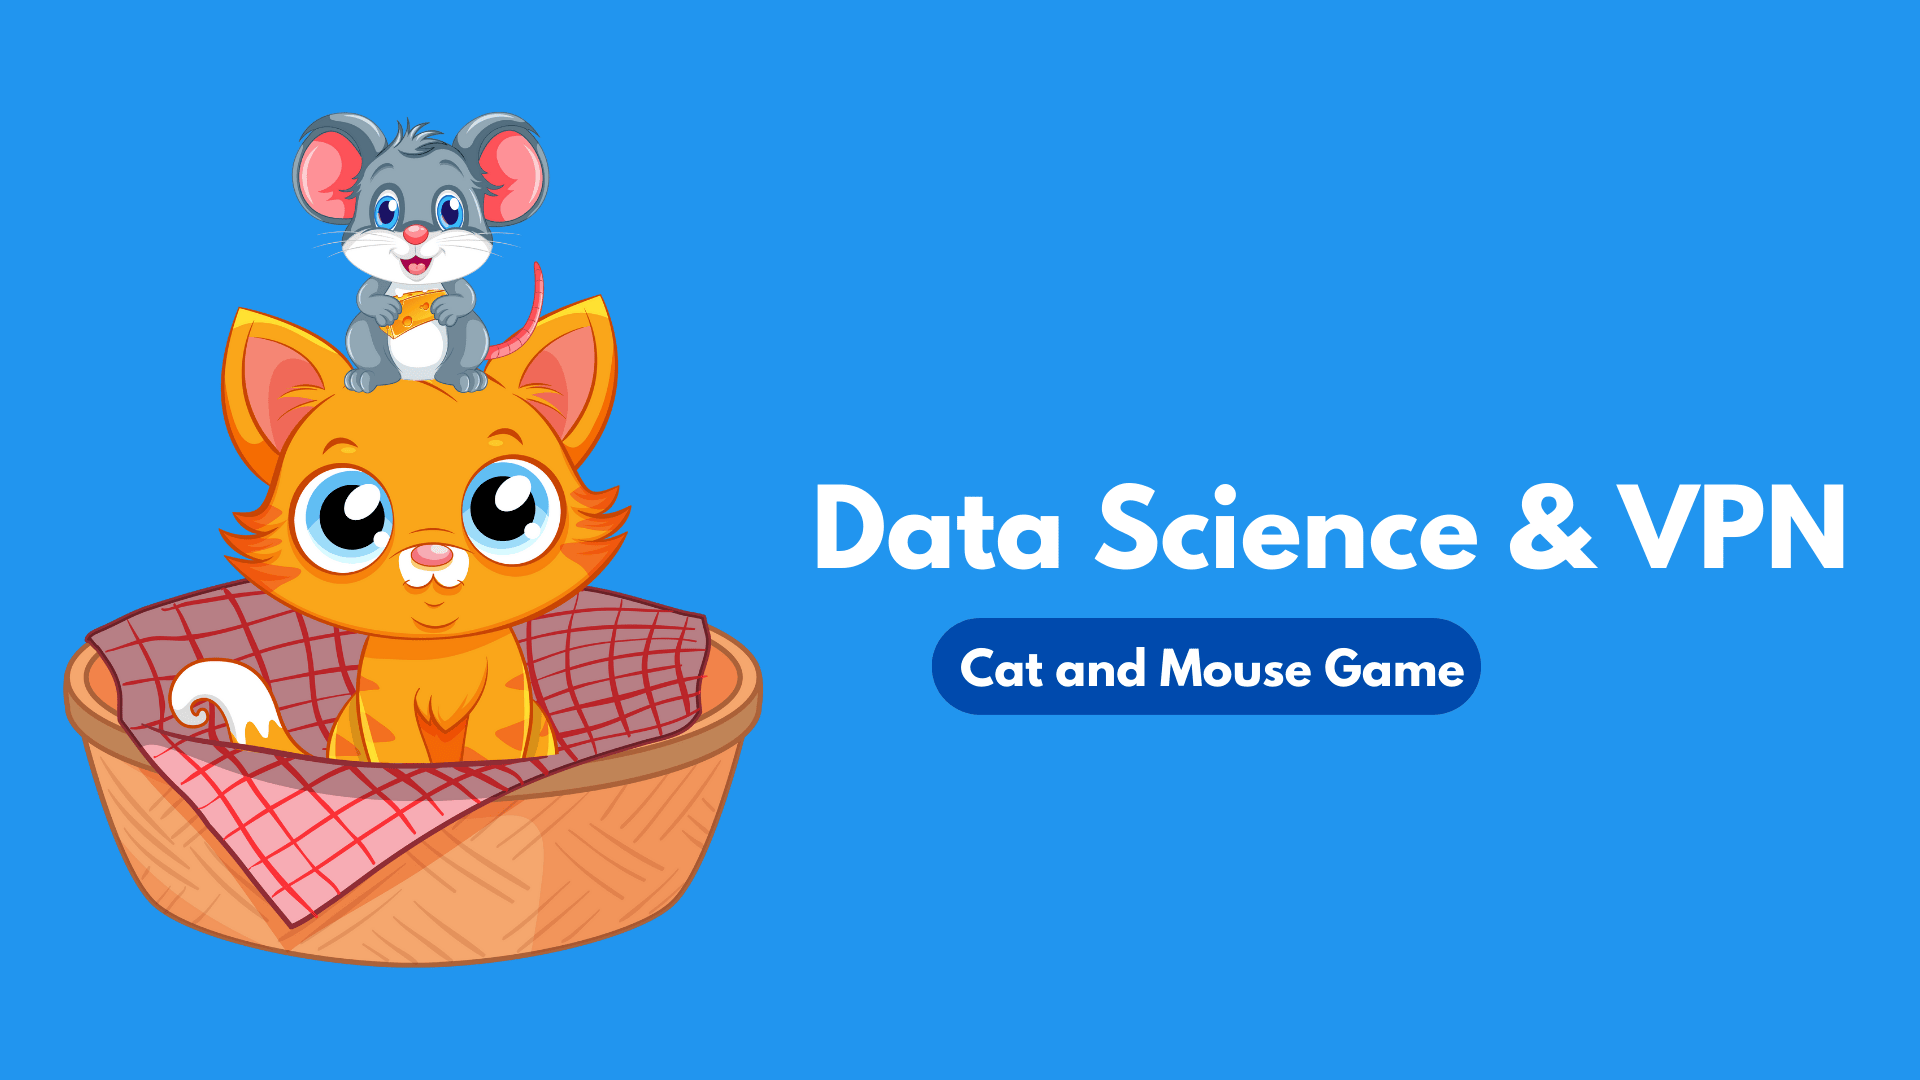 Data Science and VPNs: The Cat and Mouse Game